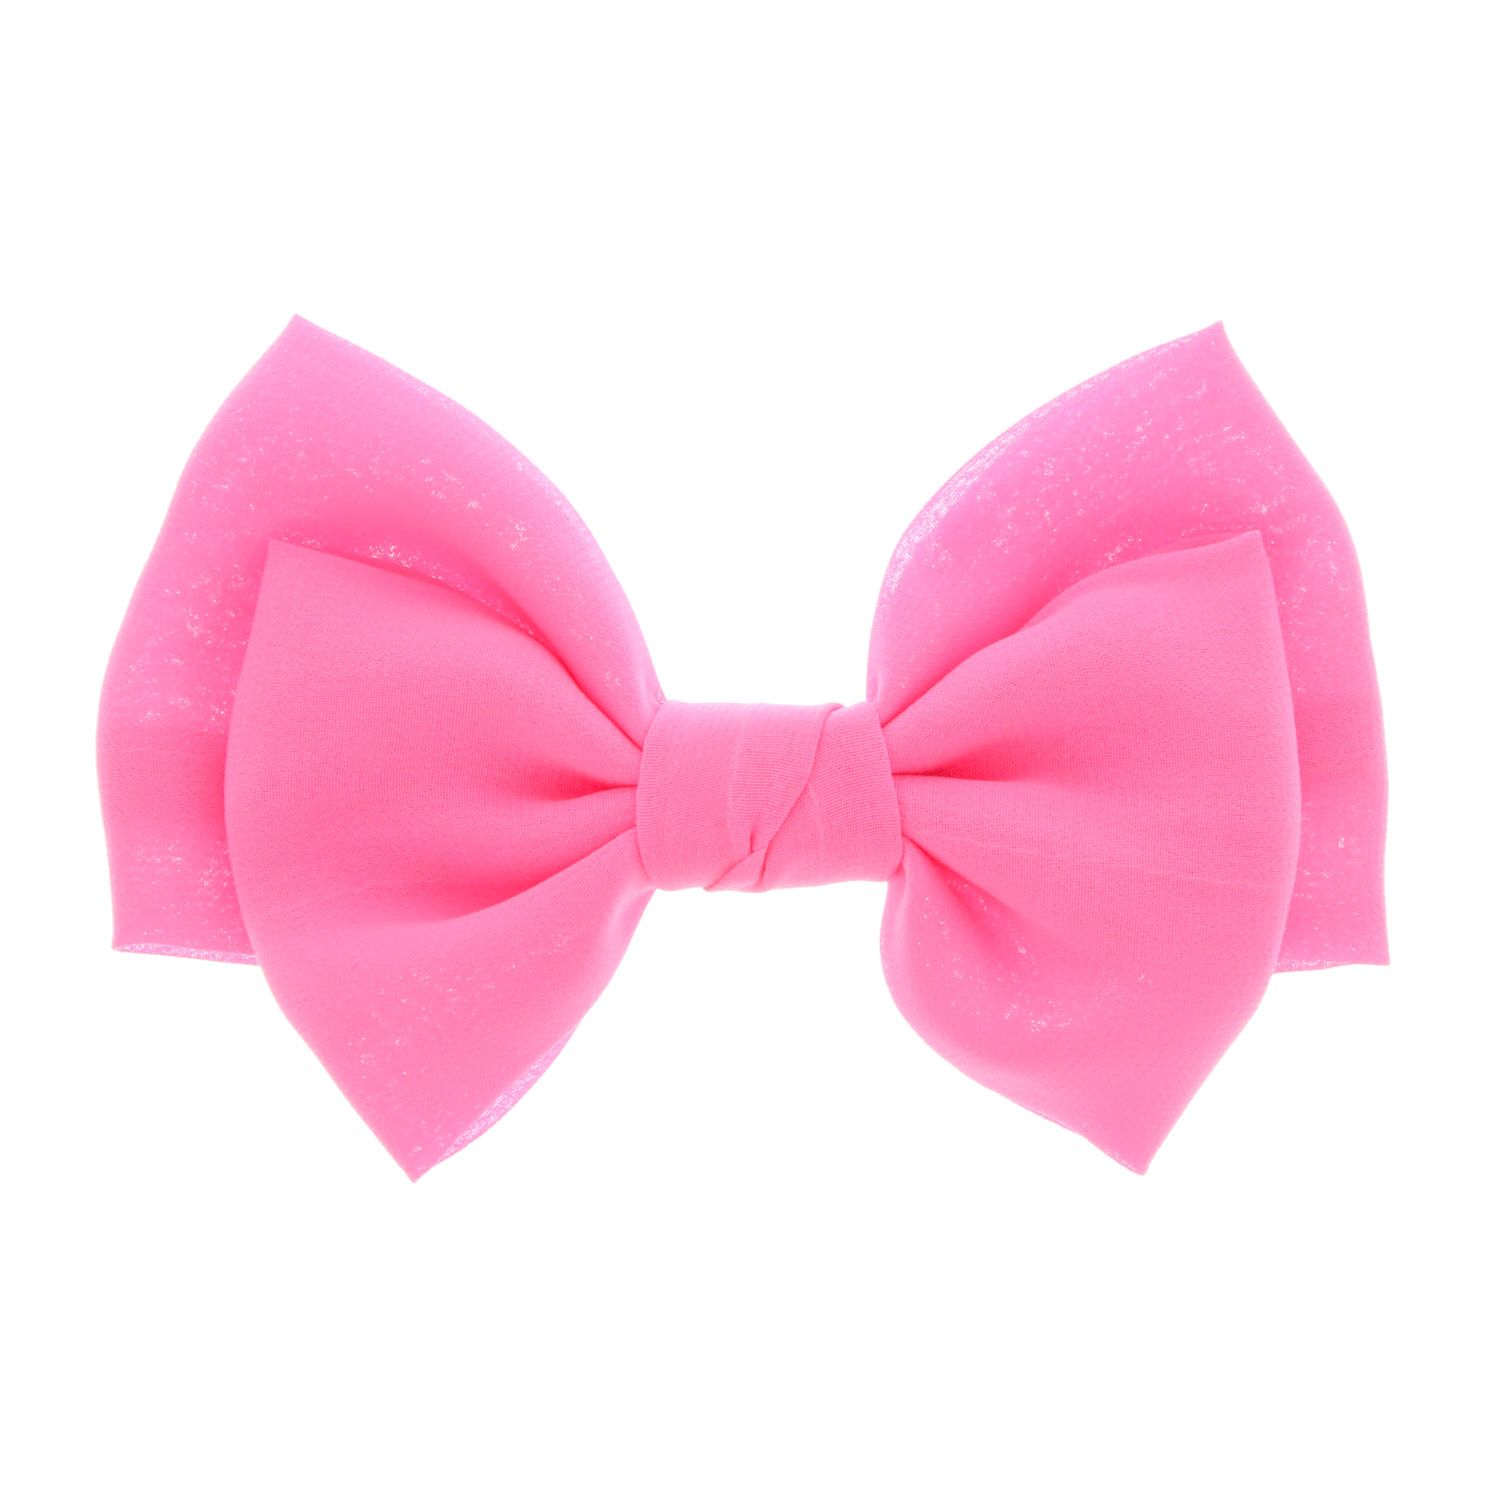 Pink ribbon hair bow clip art craft projects school clipart clipartoons